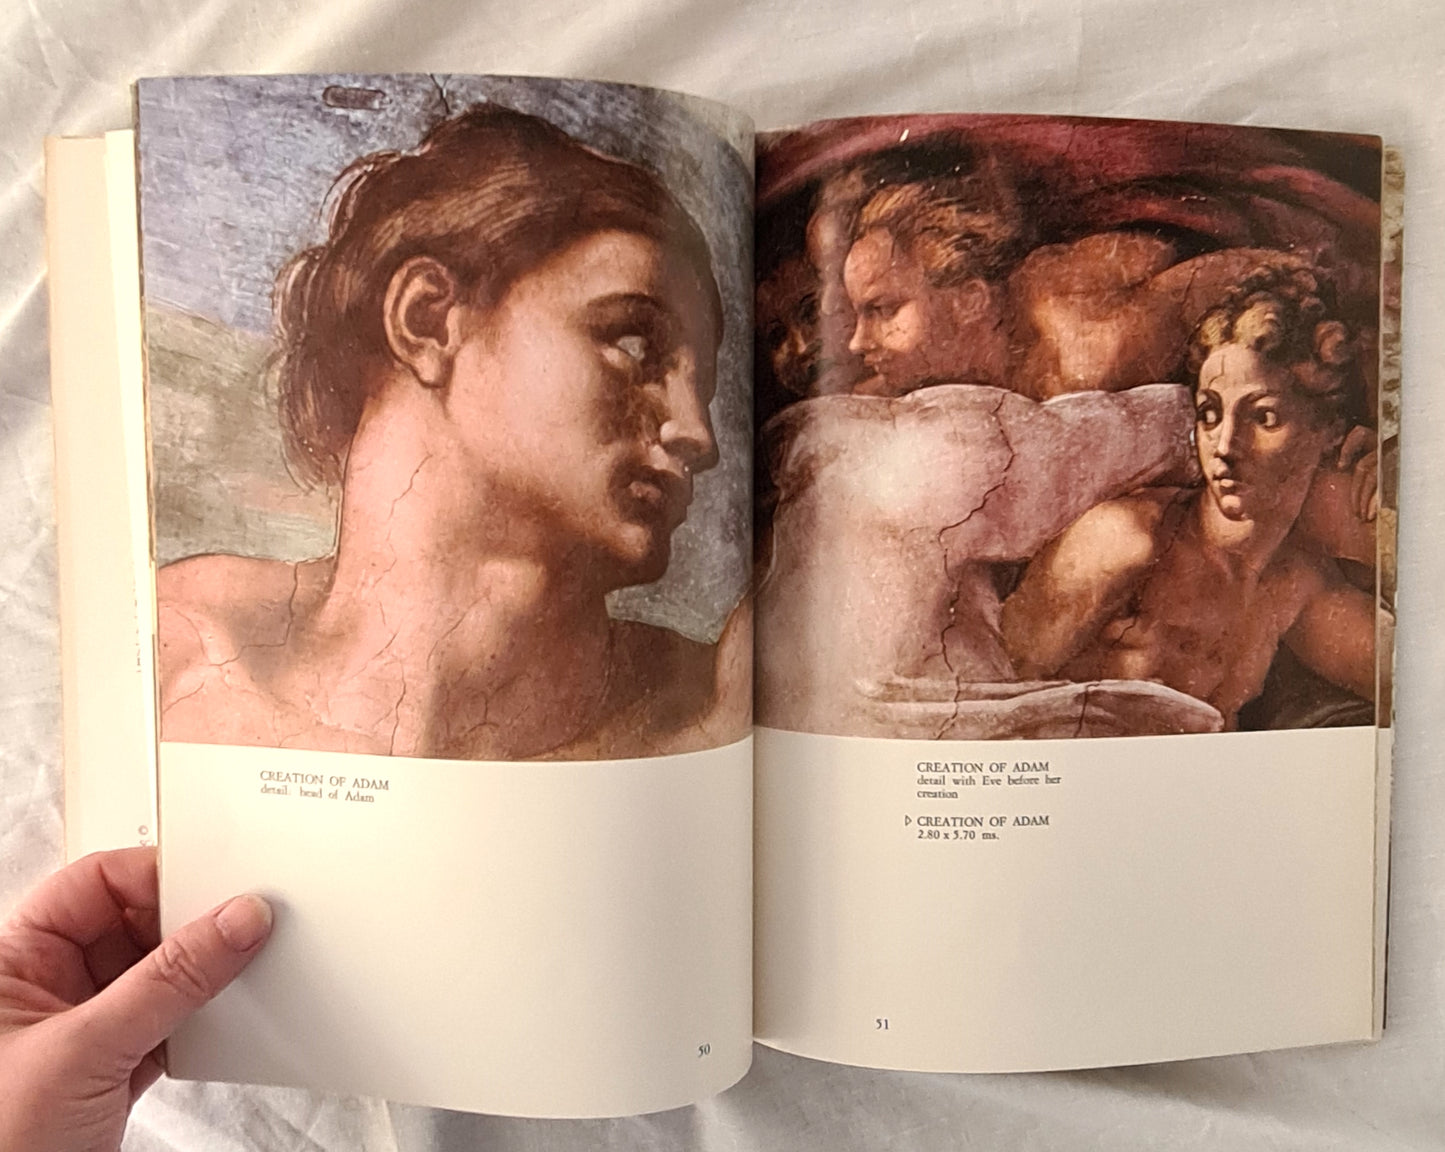 All the Frescoes of the Sistine Chapel by Lutz Heusinger and Fabrizio Mancinelli